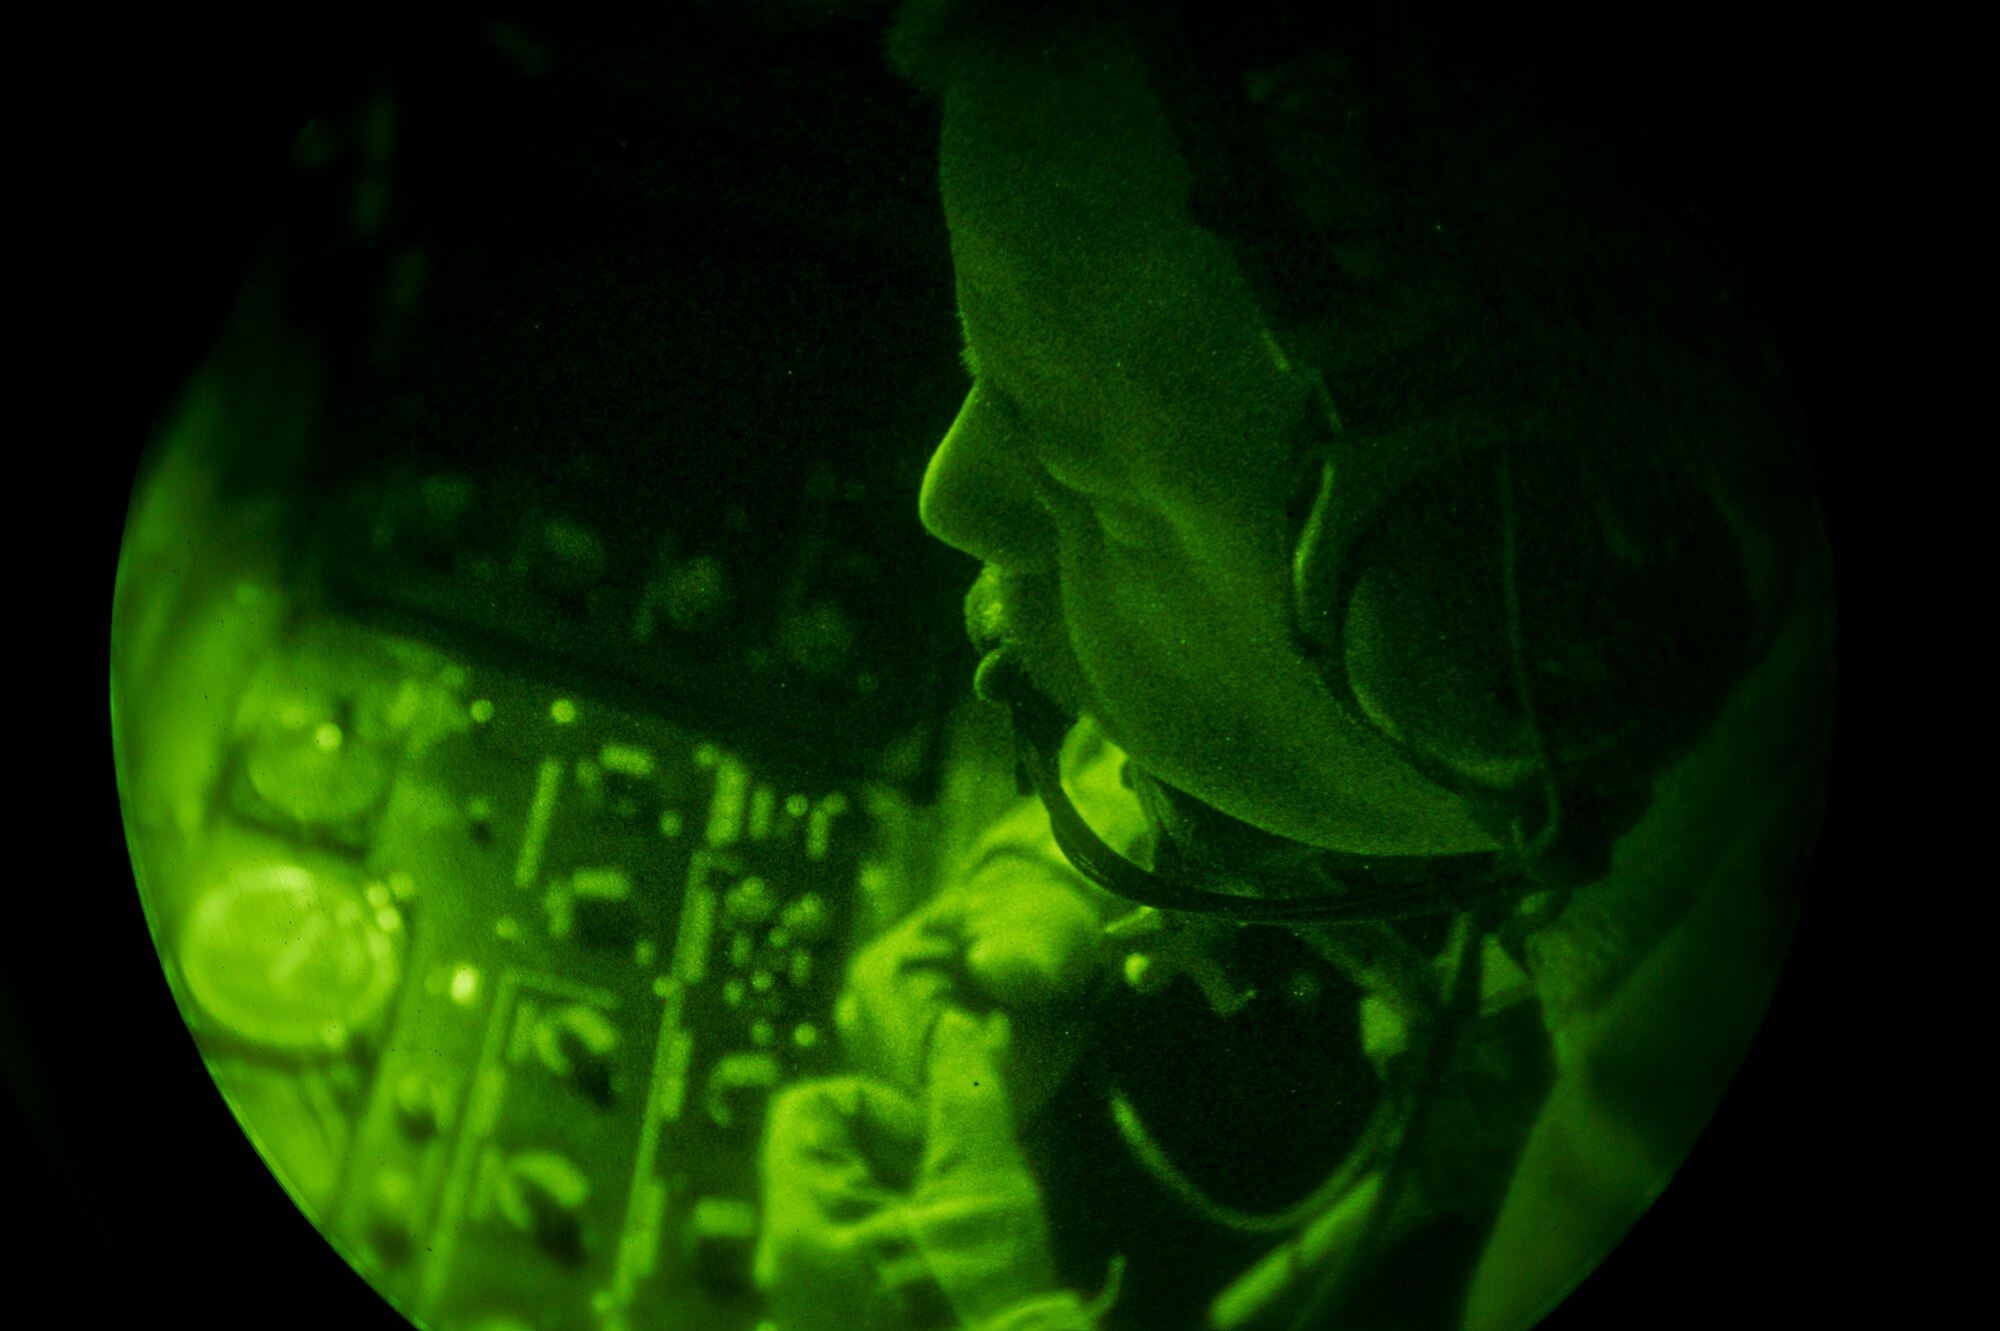 Master Sgt. Warren Bearup, a 340th Expeditionary Air Refueling Squadron KC-135 Stratotanker boom operator, prepares a boom for an in-air refueling during a mission over an undisclosed location, Southwest Asia, April 25. The mission supported air operations in and around Afghanistan as part of Operation Enduring Freedom. Bearup is deployed from the 18th Air Refueling Squadron, McConnell Air Force Base, Kan. (U.S. Air Force photo/Staff Sgt. Alexander Martinez)